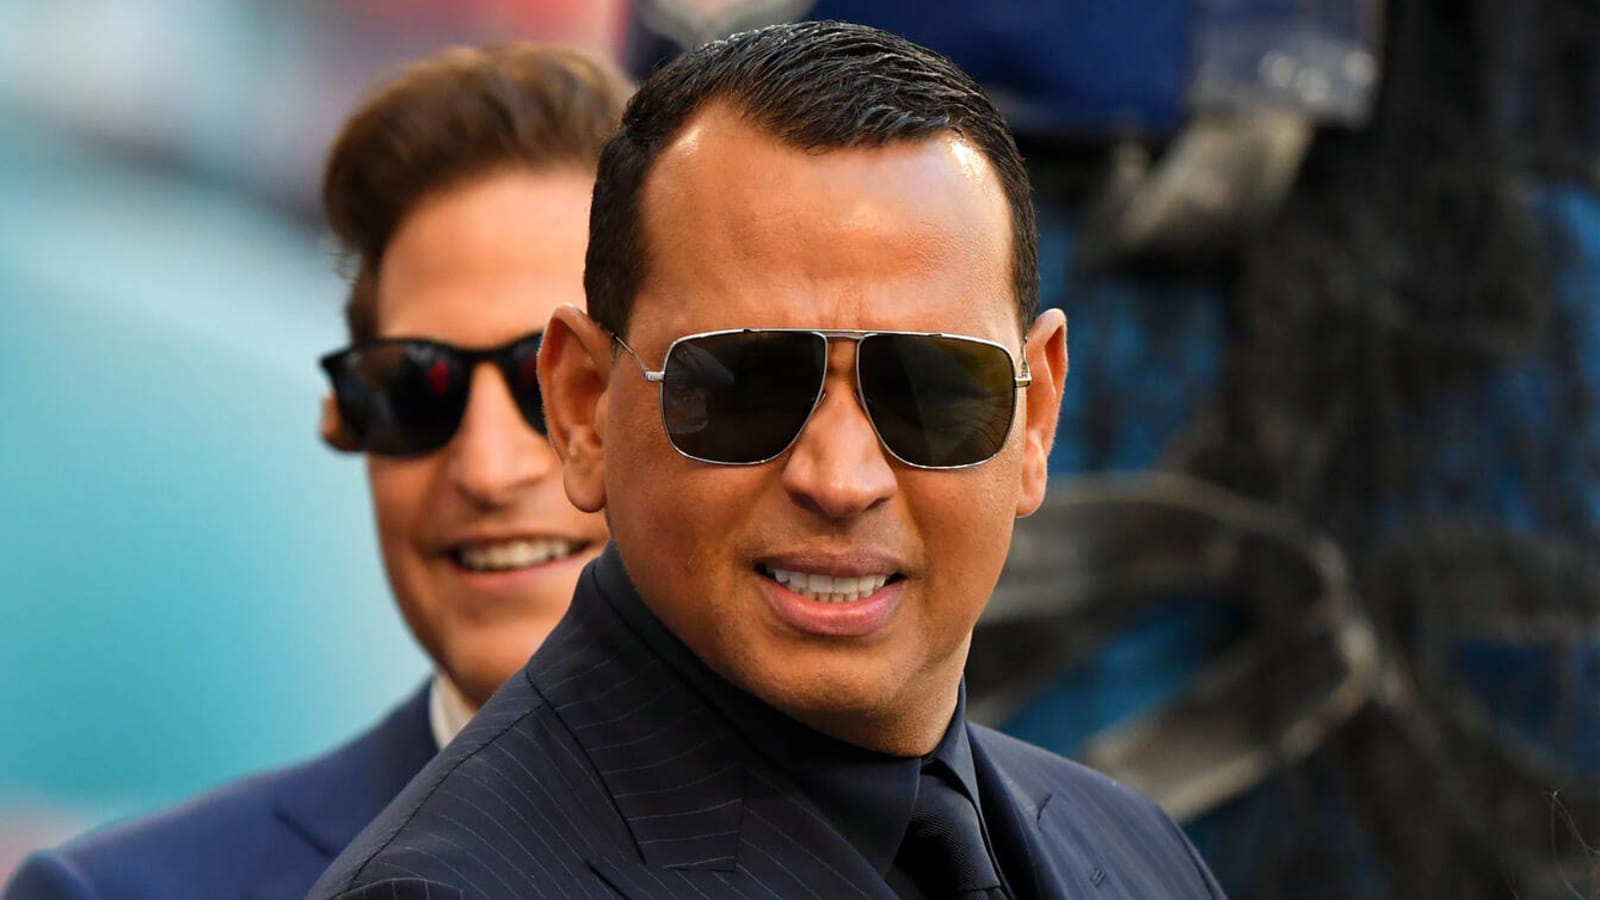 A-Rod teases MLB return: 'May have to make a little comeback'